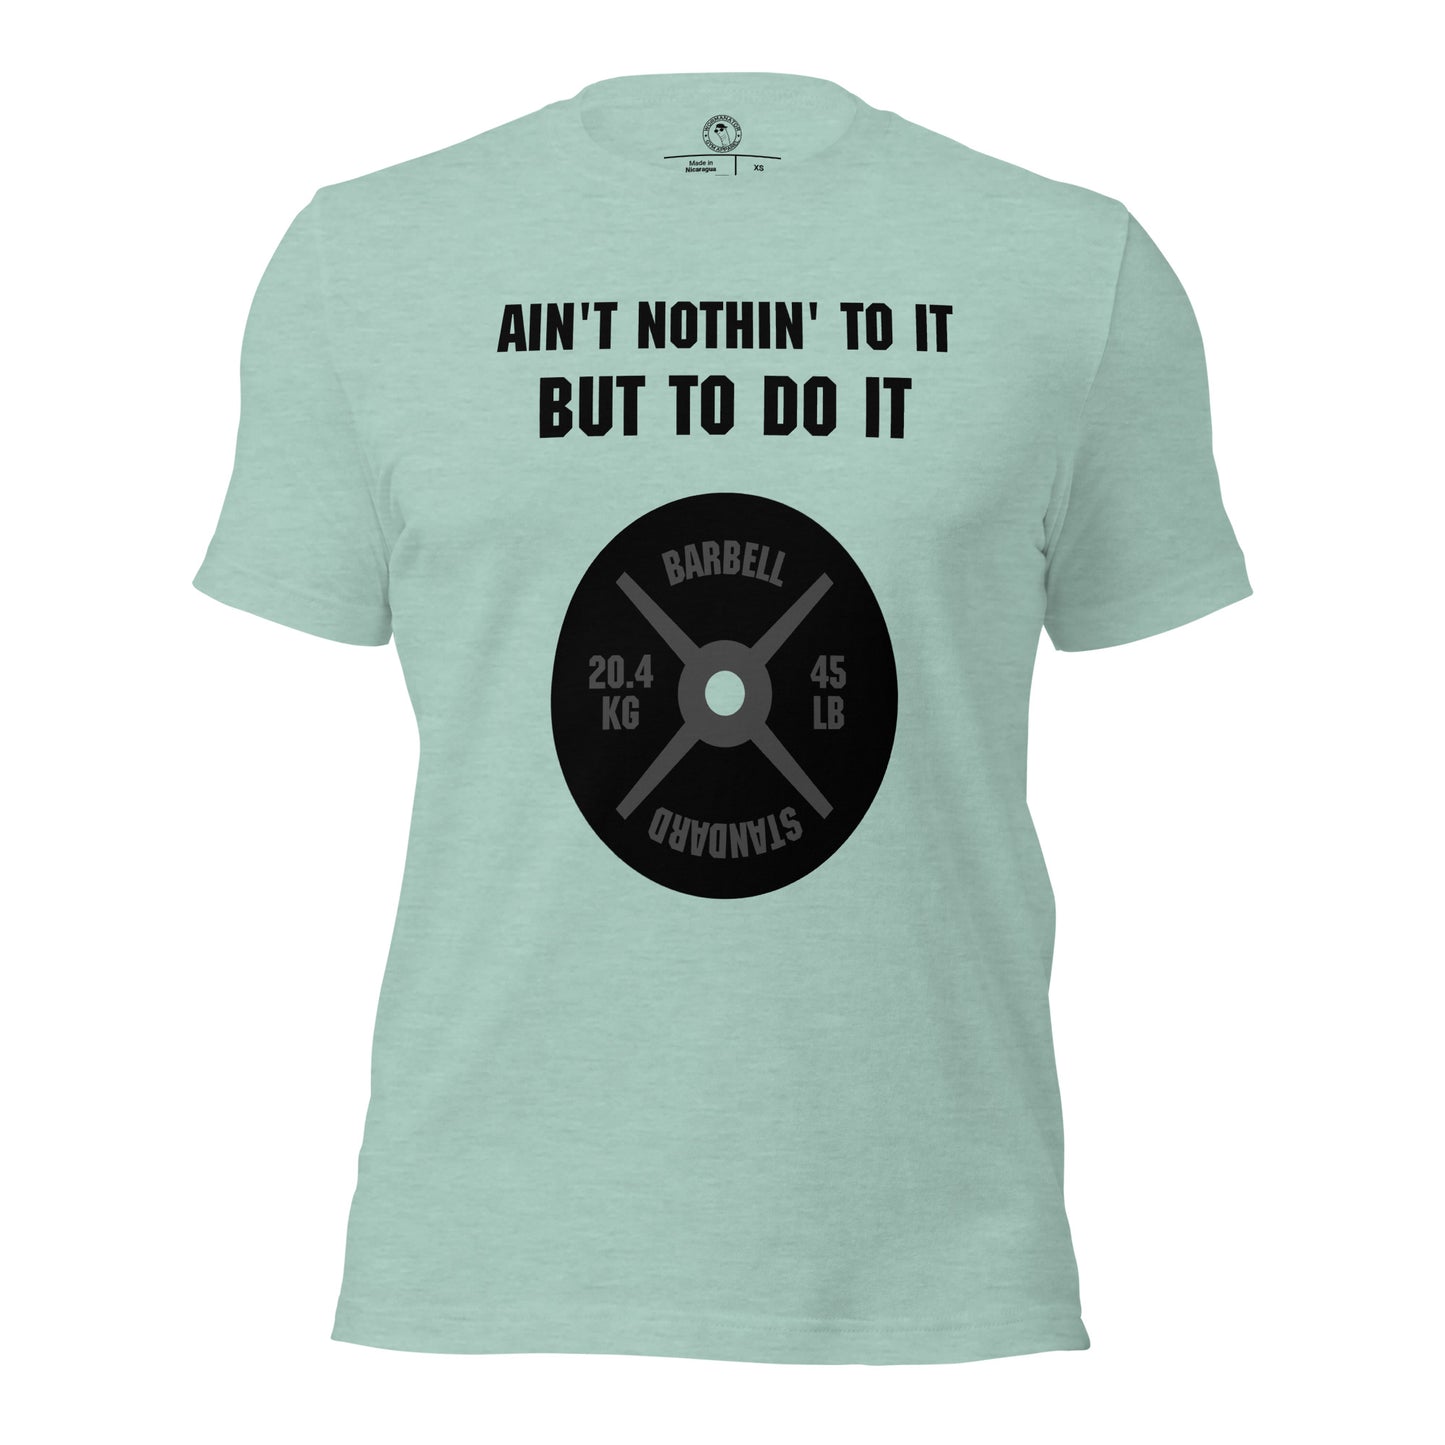 Ain't Nothin' To It But To Do It Shirt in Heather Prism Dusty Blue